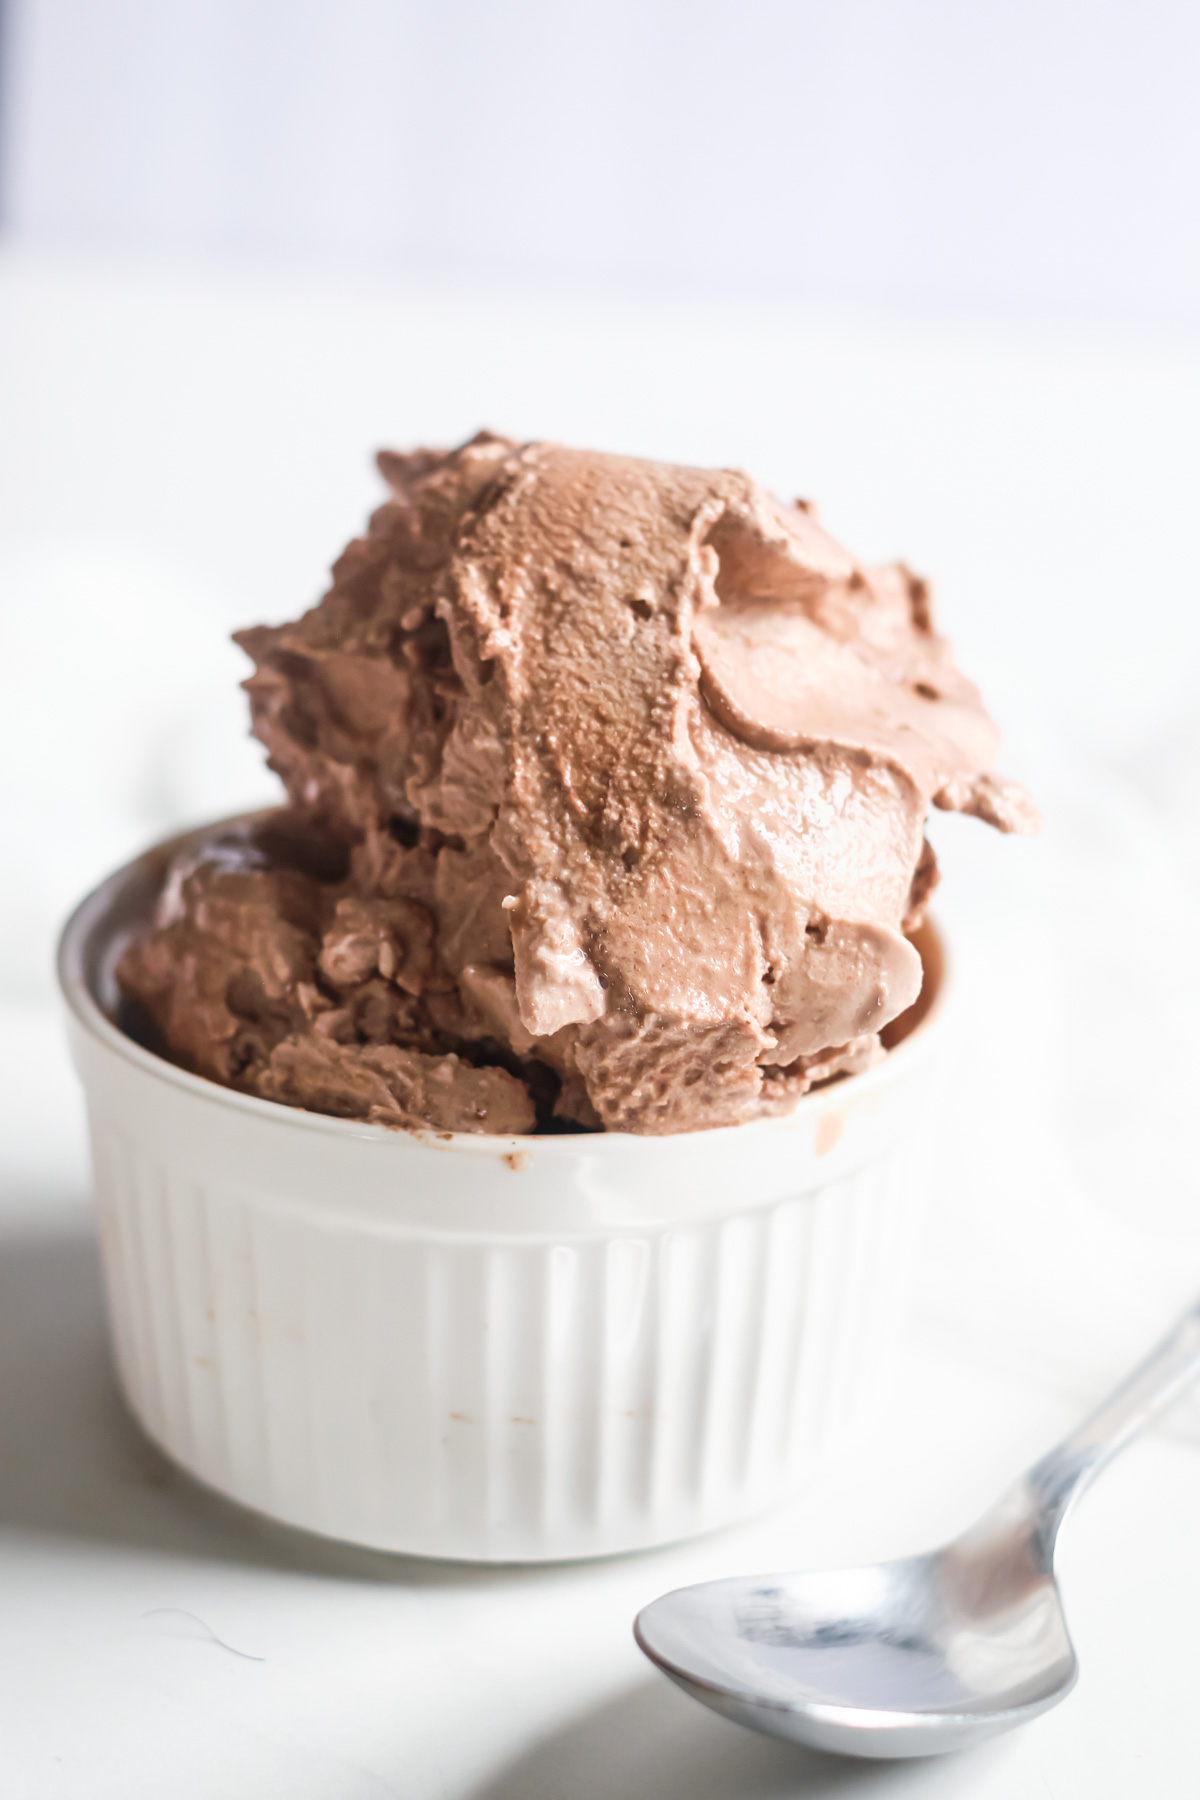 a dessert dish filled with chocolate ice cream and a spoon set in front.